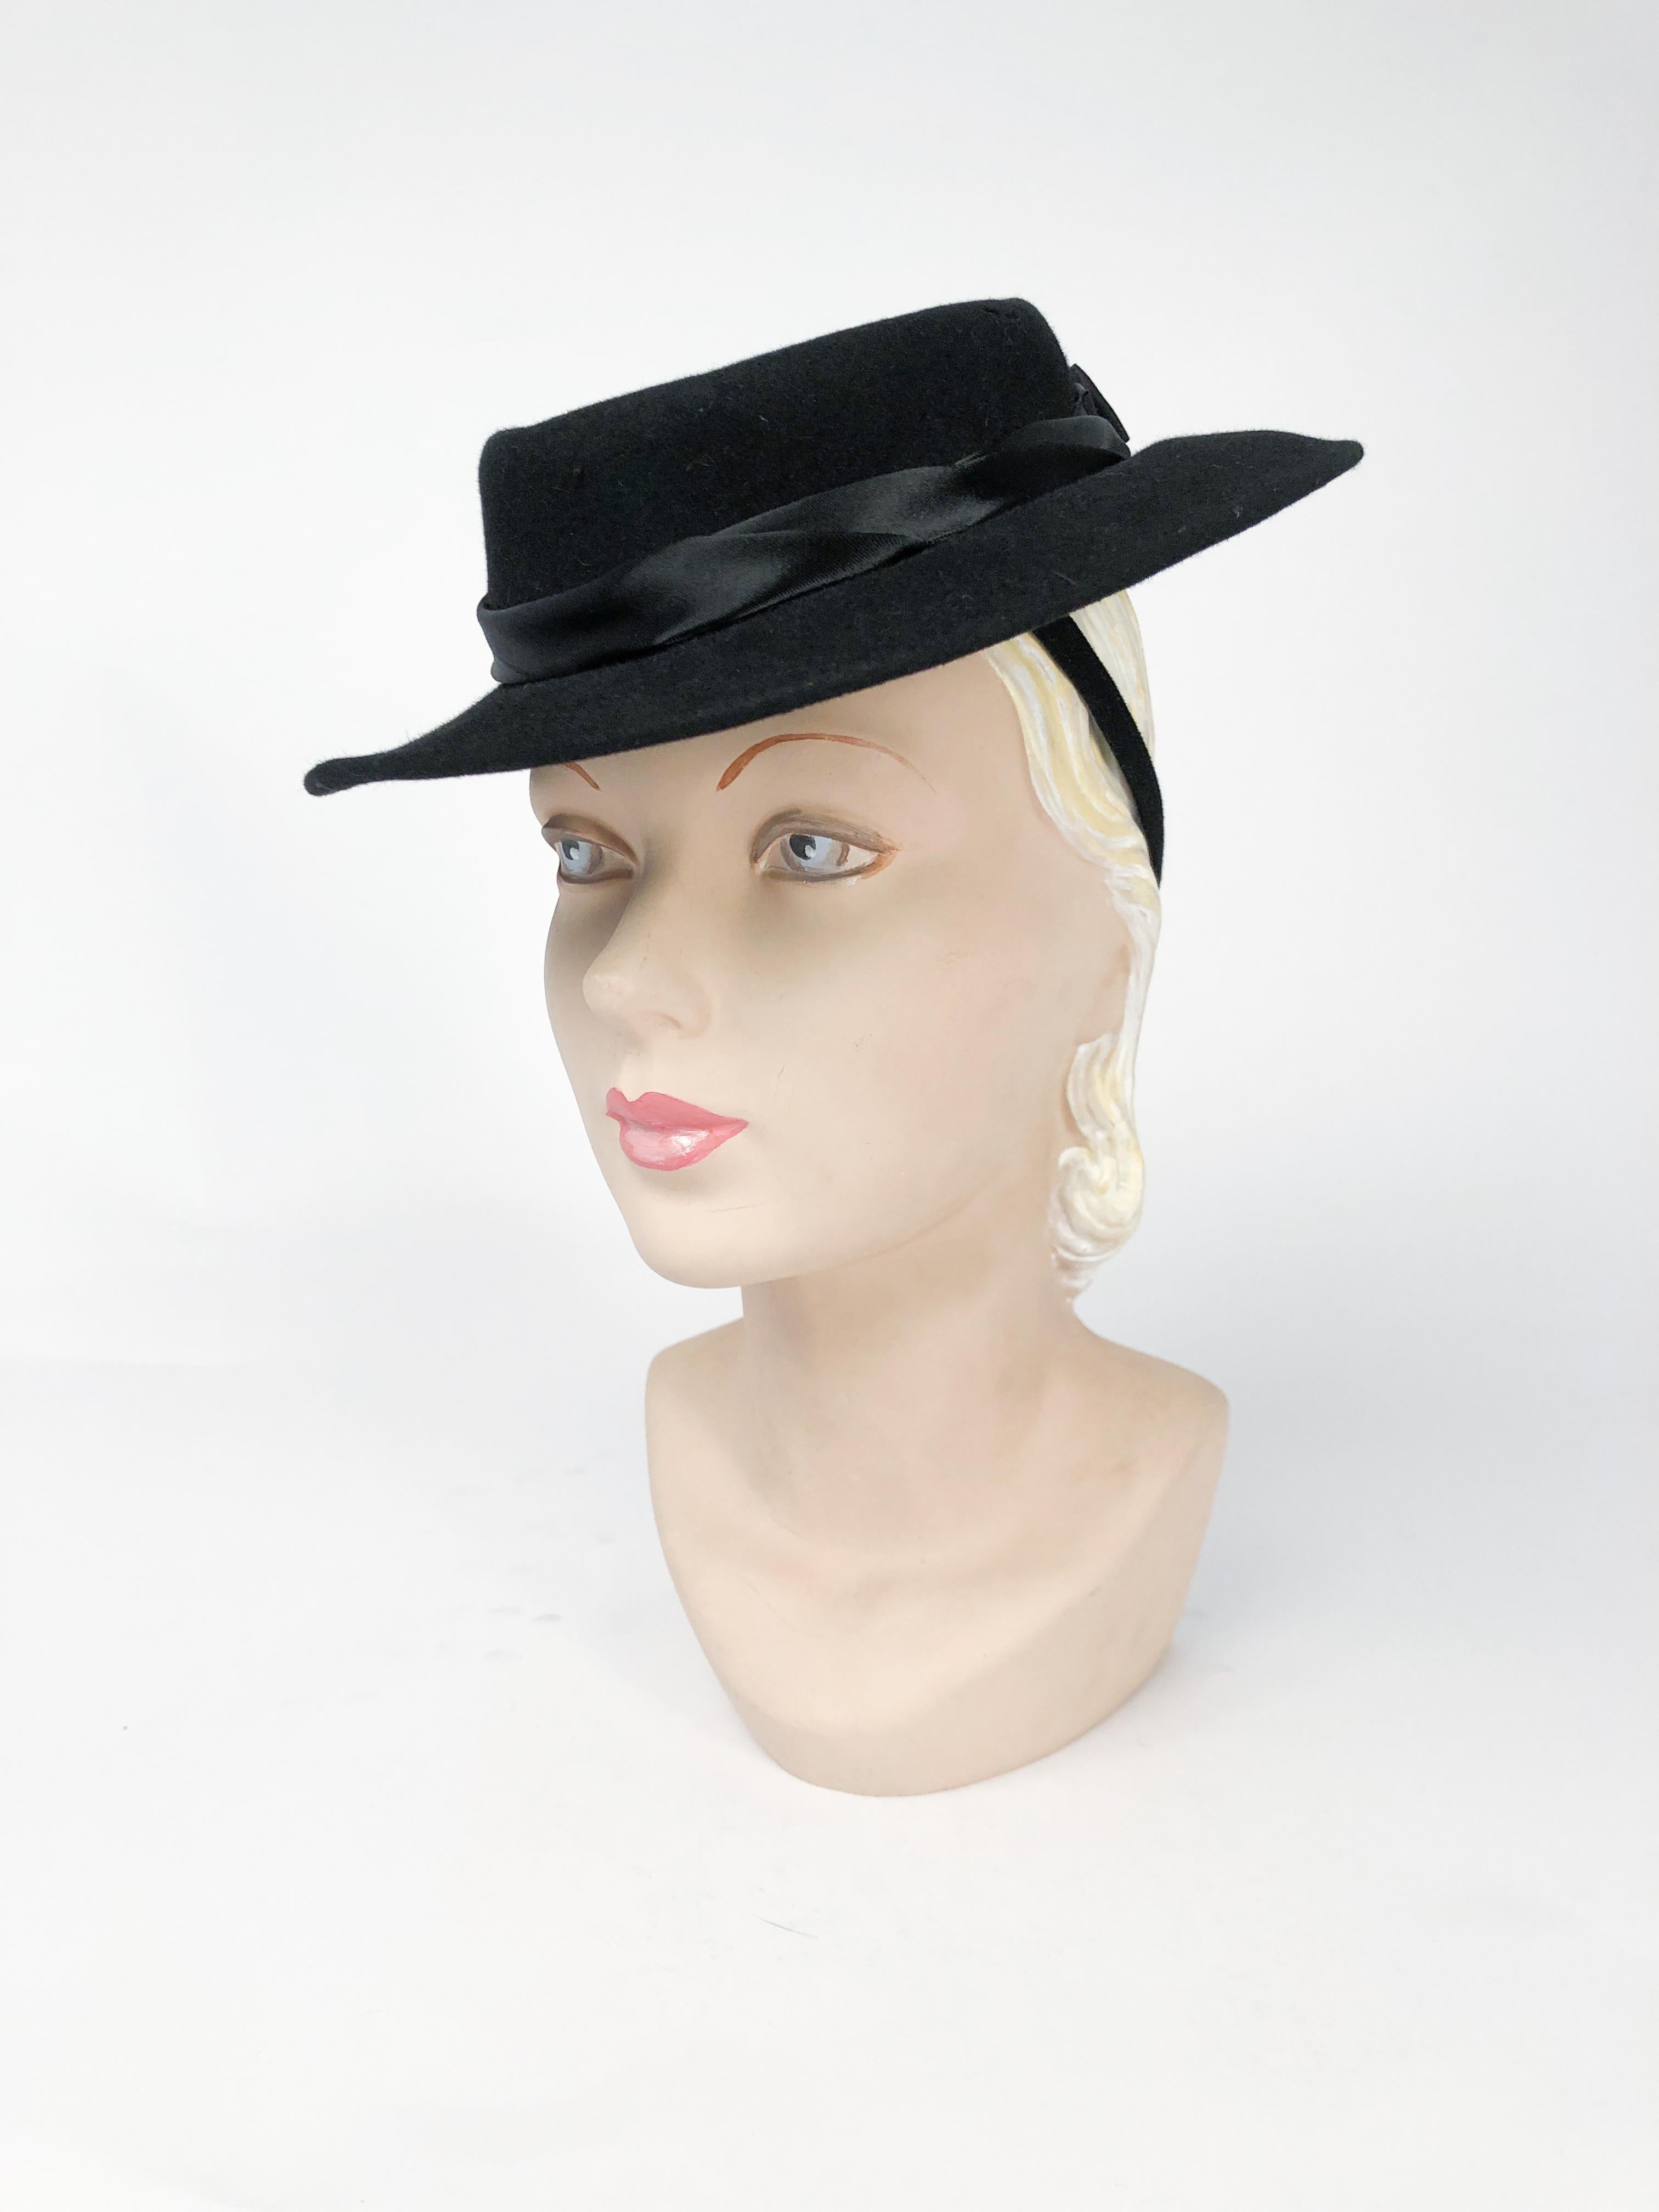 Black cashmere felt hat with hand-rolled silk satin band, layered bow, and rhinestone accent (black and clear rhinestones). Felt hat band with elastic attachment to further secure the hat to the head. 